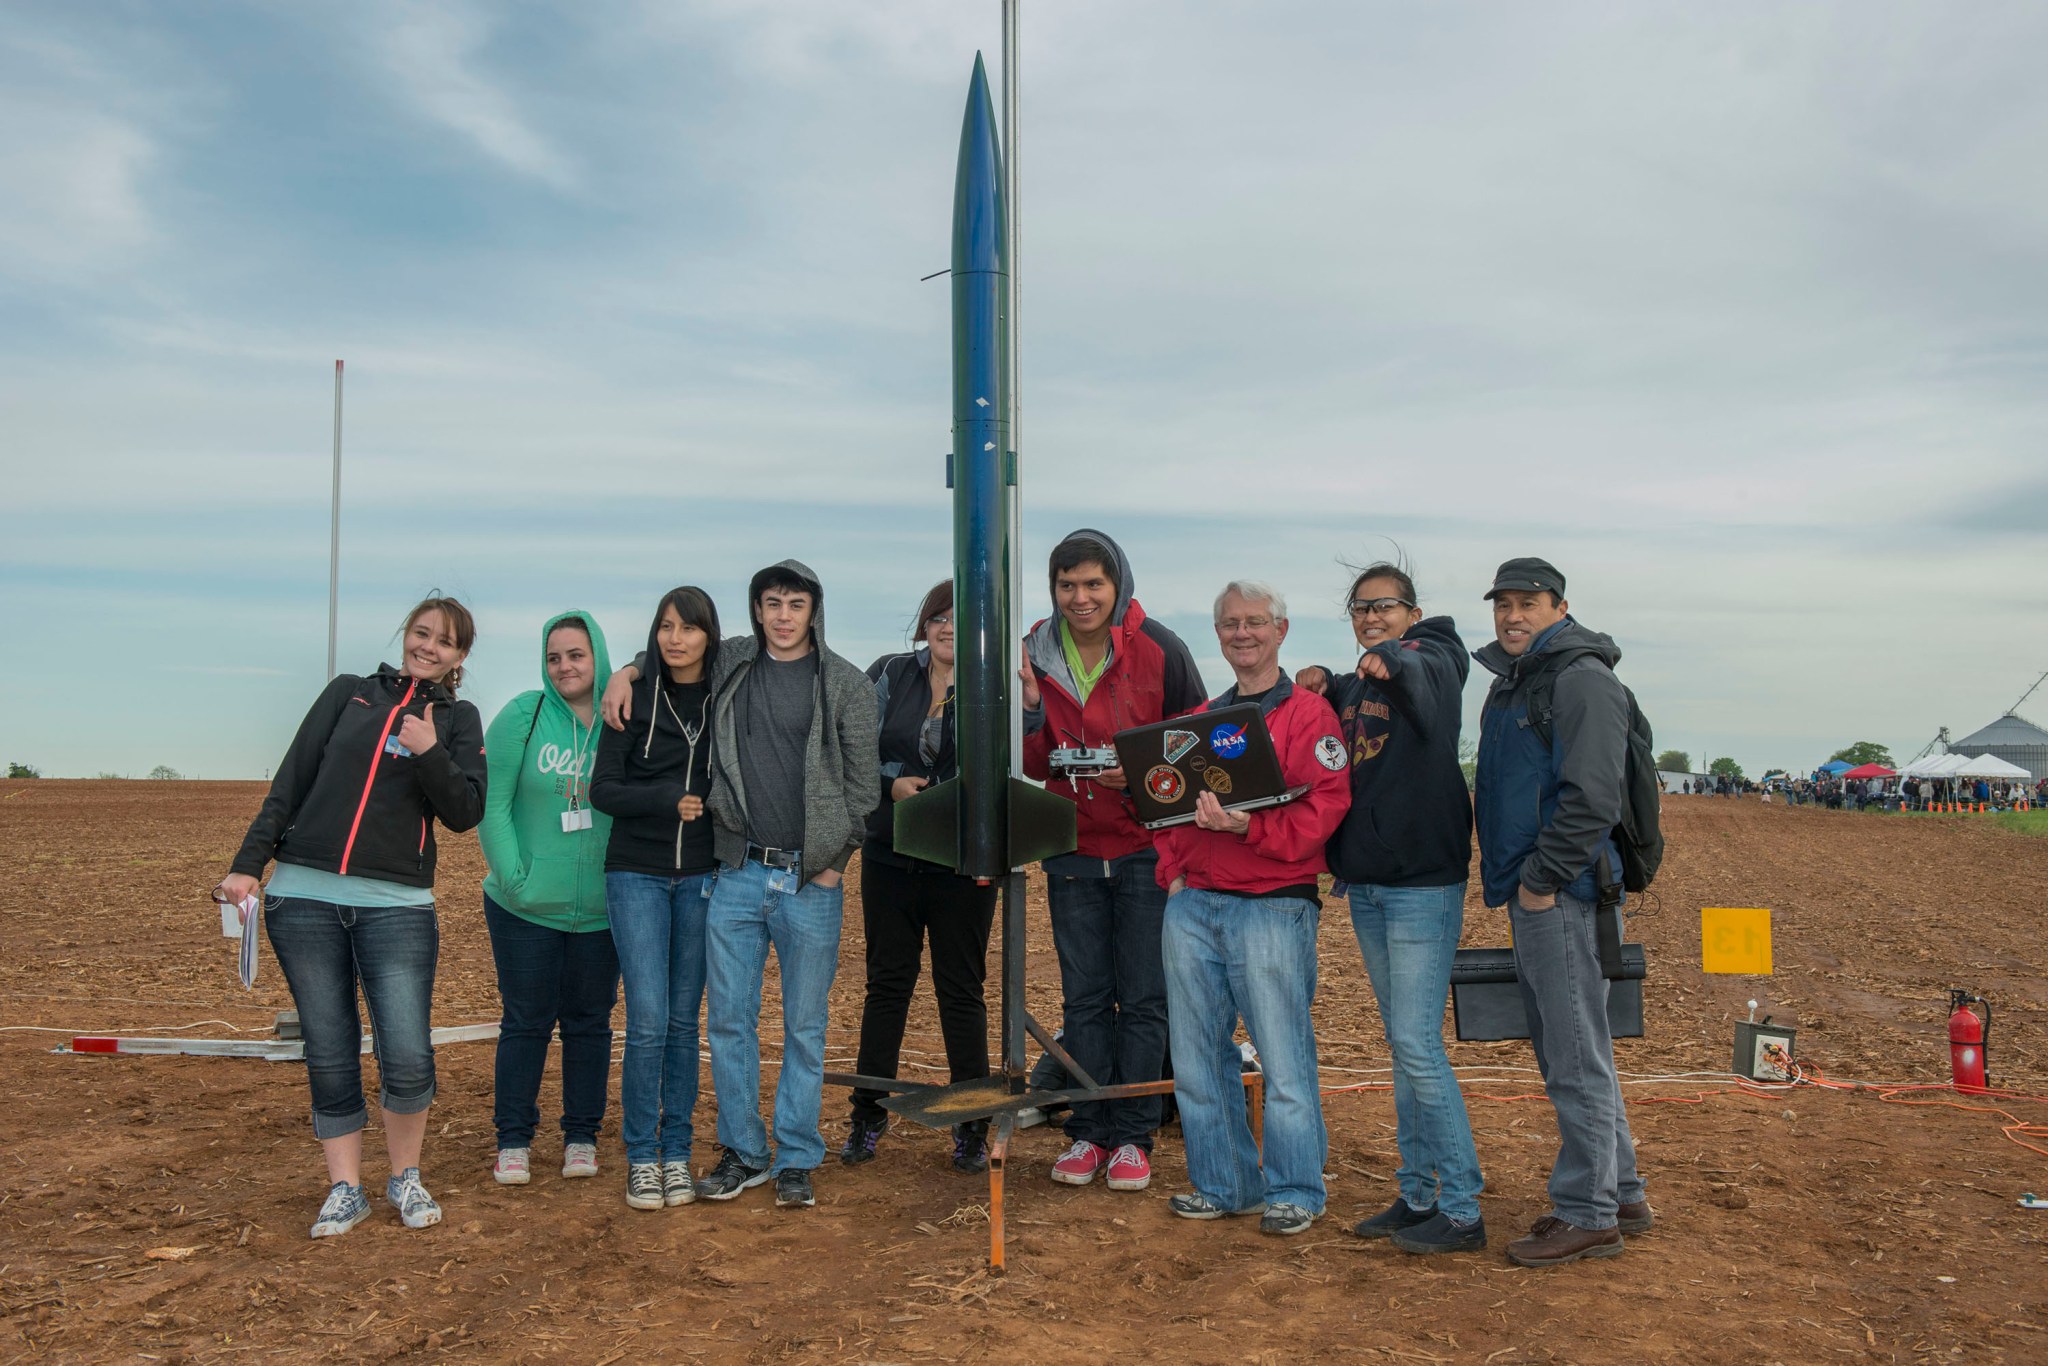 Students and team members from Northwest Indian College stand next to their rocket at a NASA event.